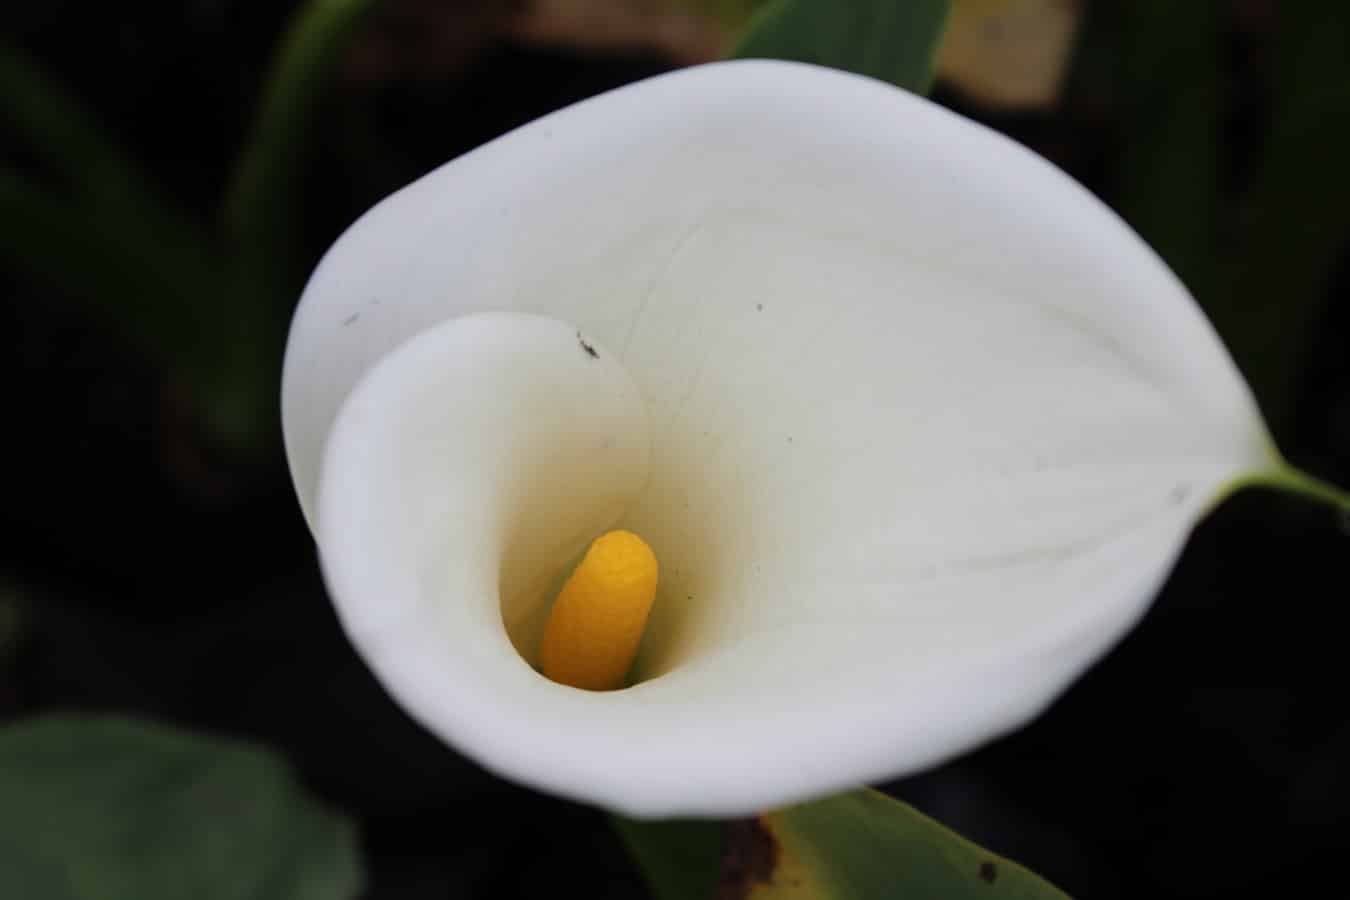 Calla is a herbaceous plant